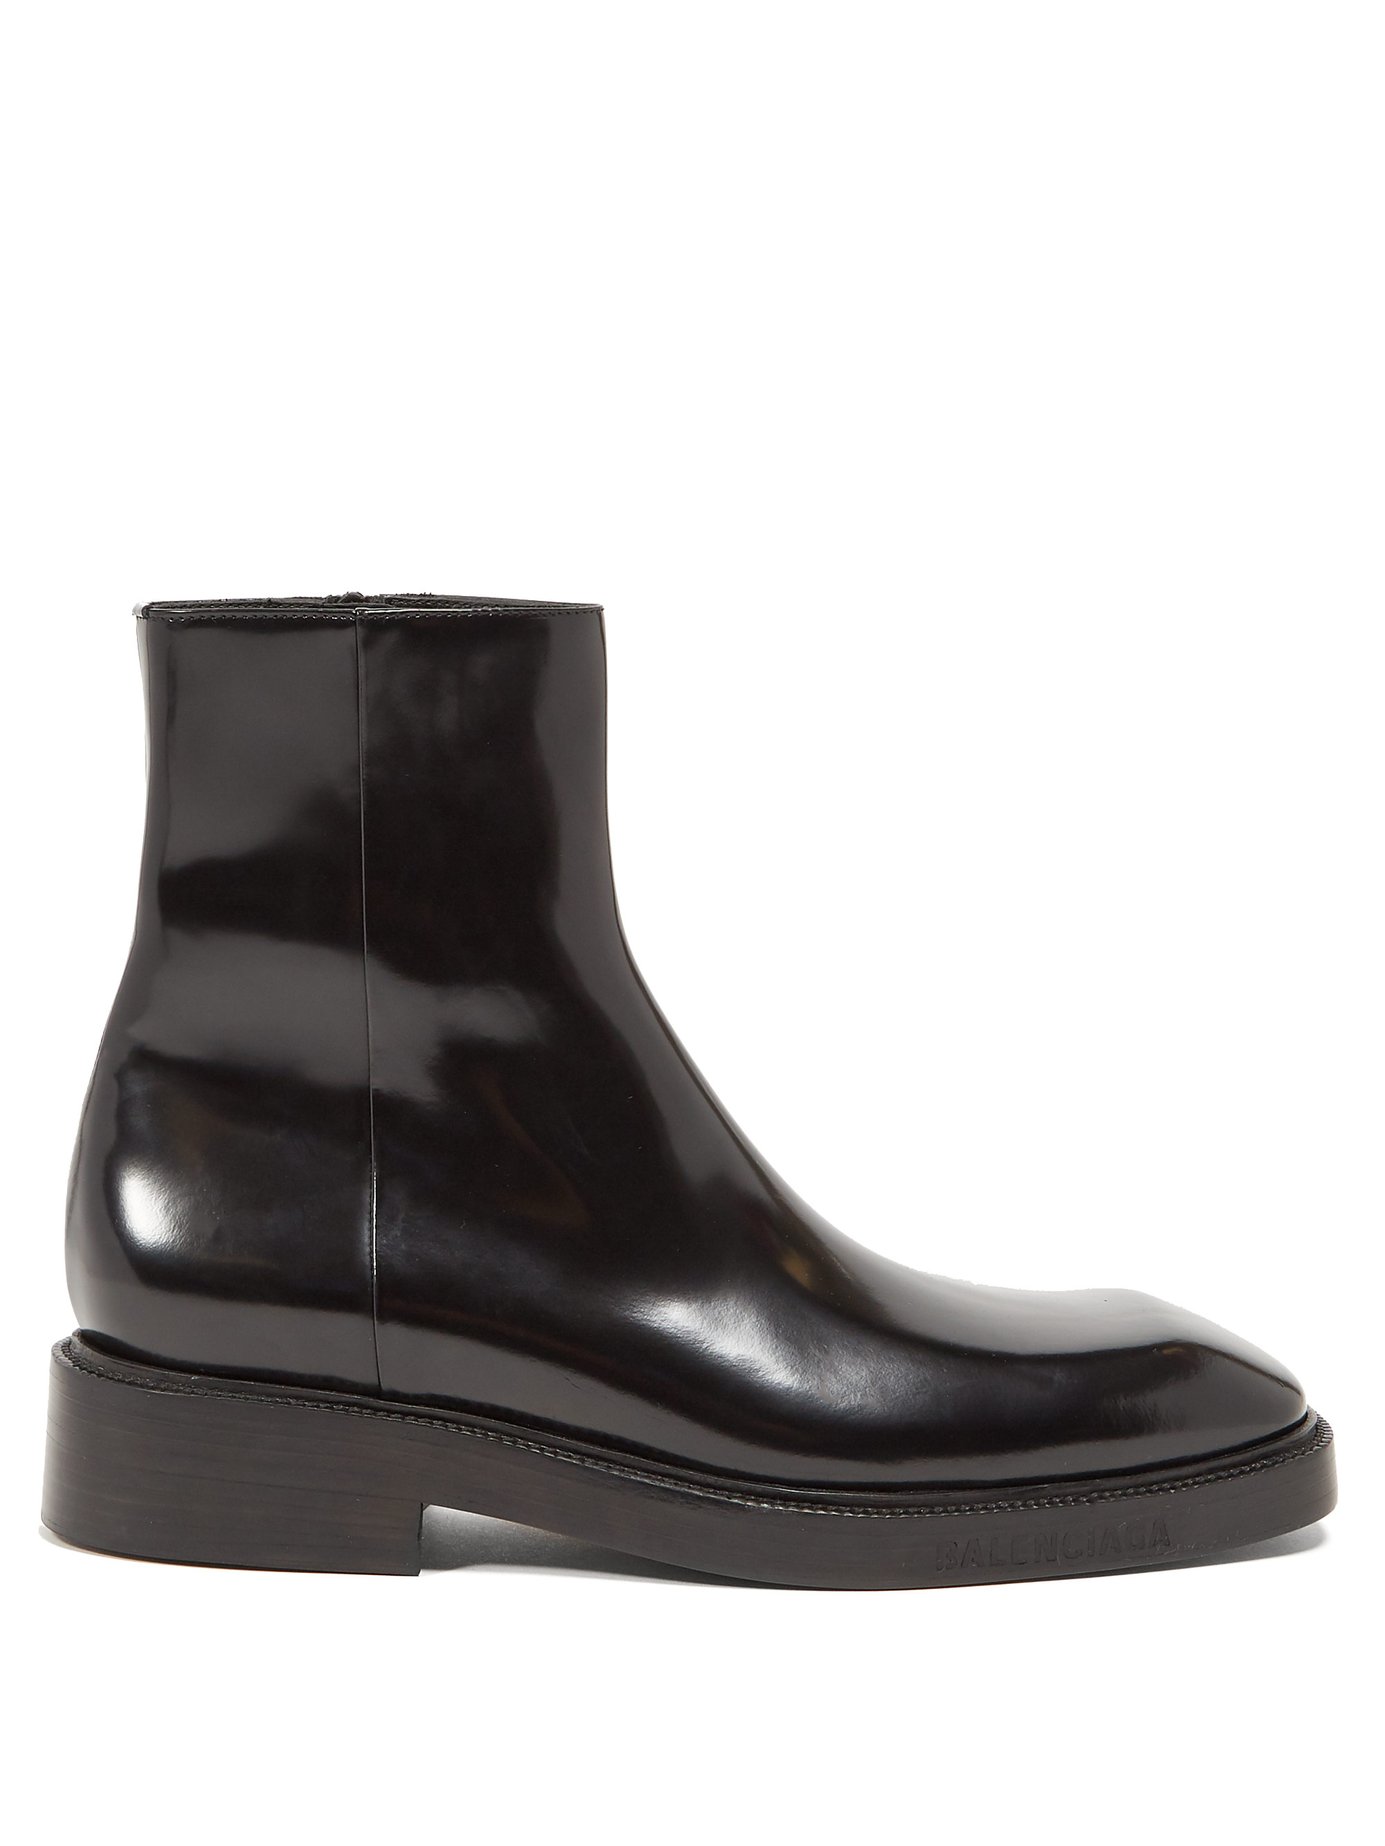 Luxury boots for men  Balenciaga black patent leather boots